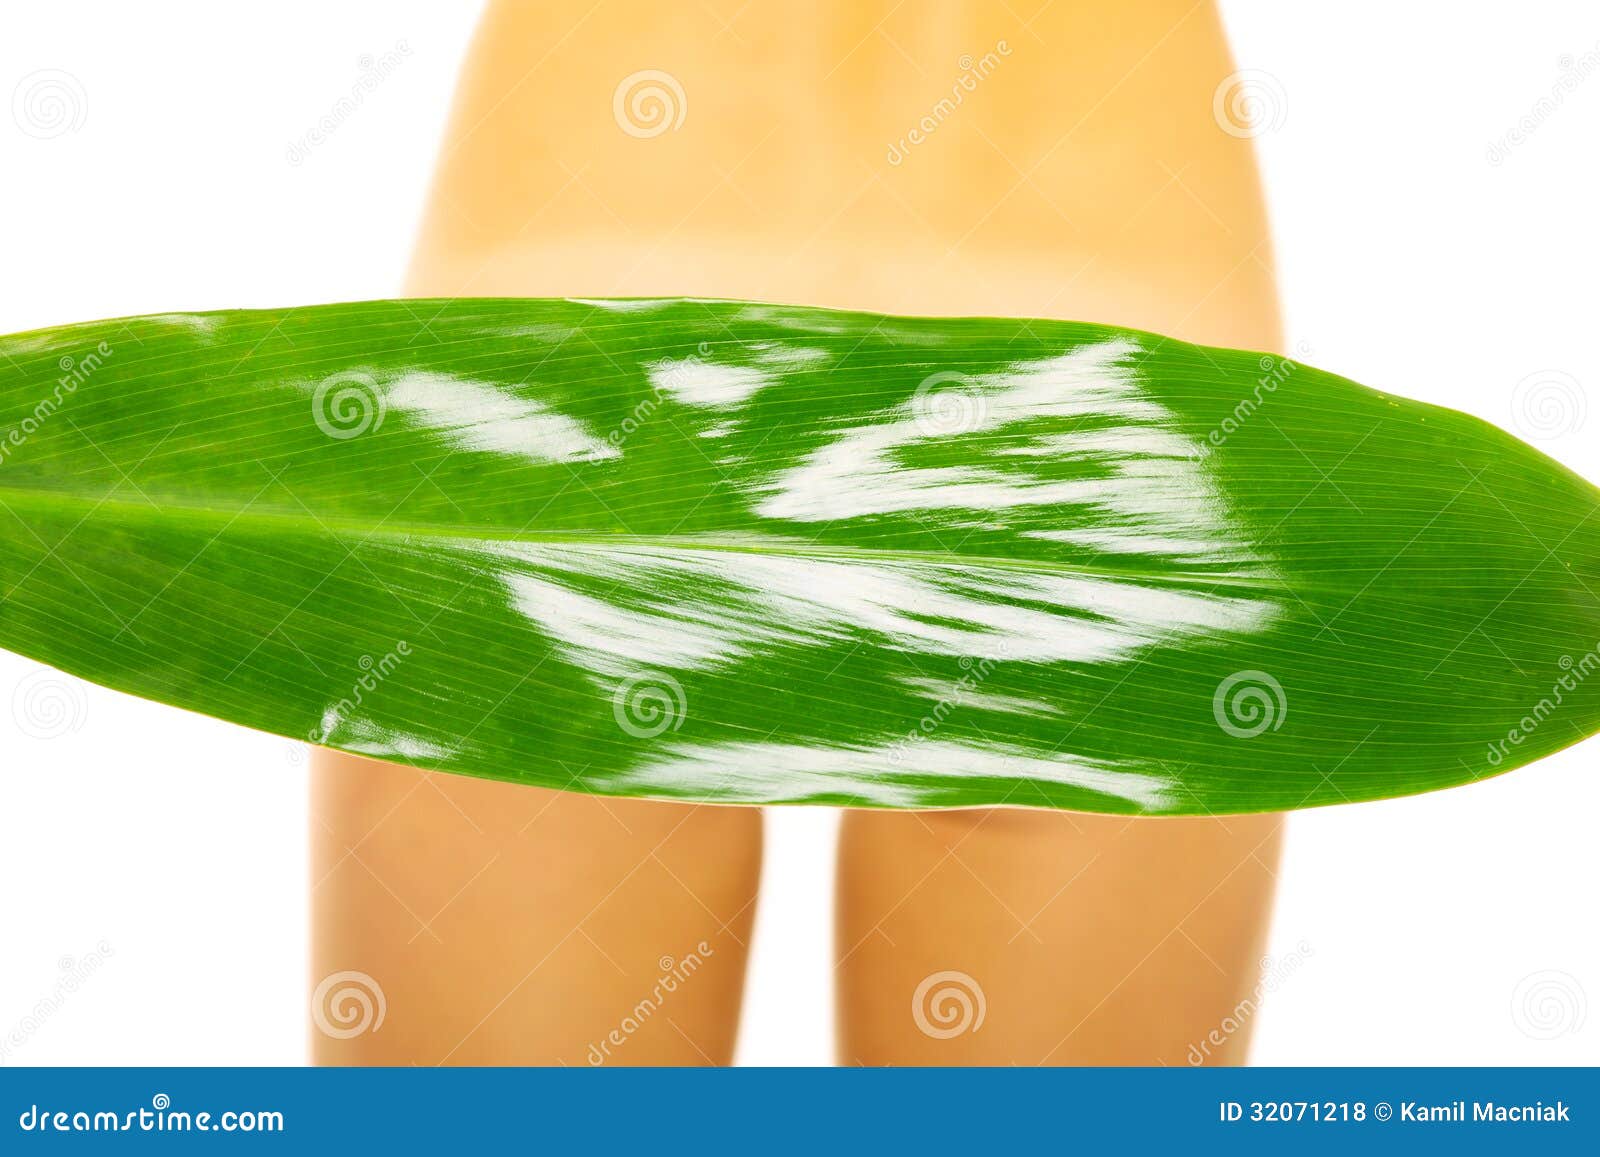 Censorship stock photo. Image of plant, attractive, natural - 32071218